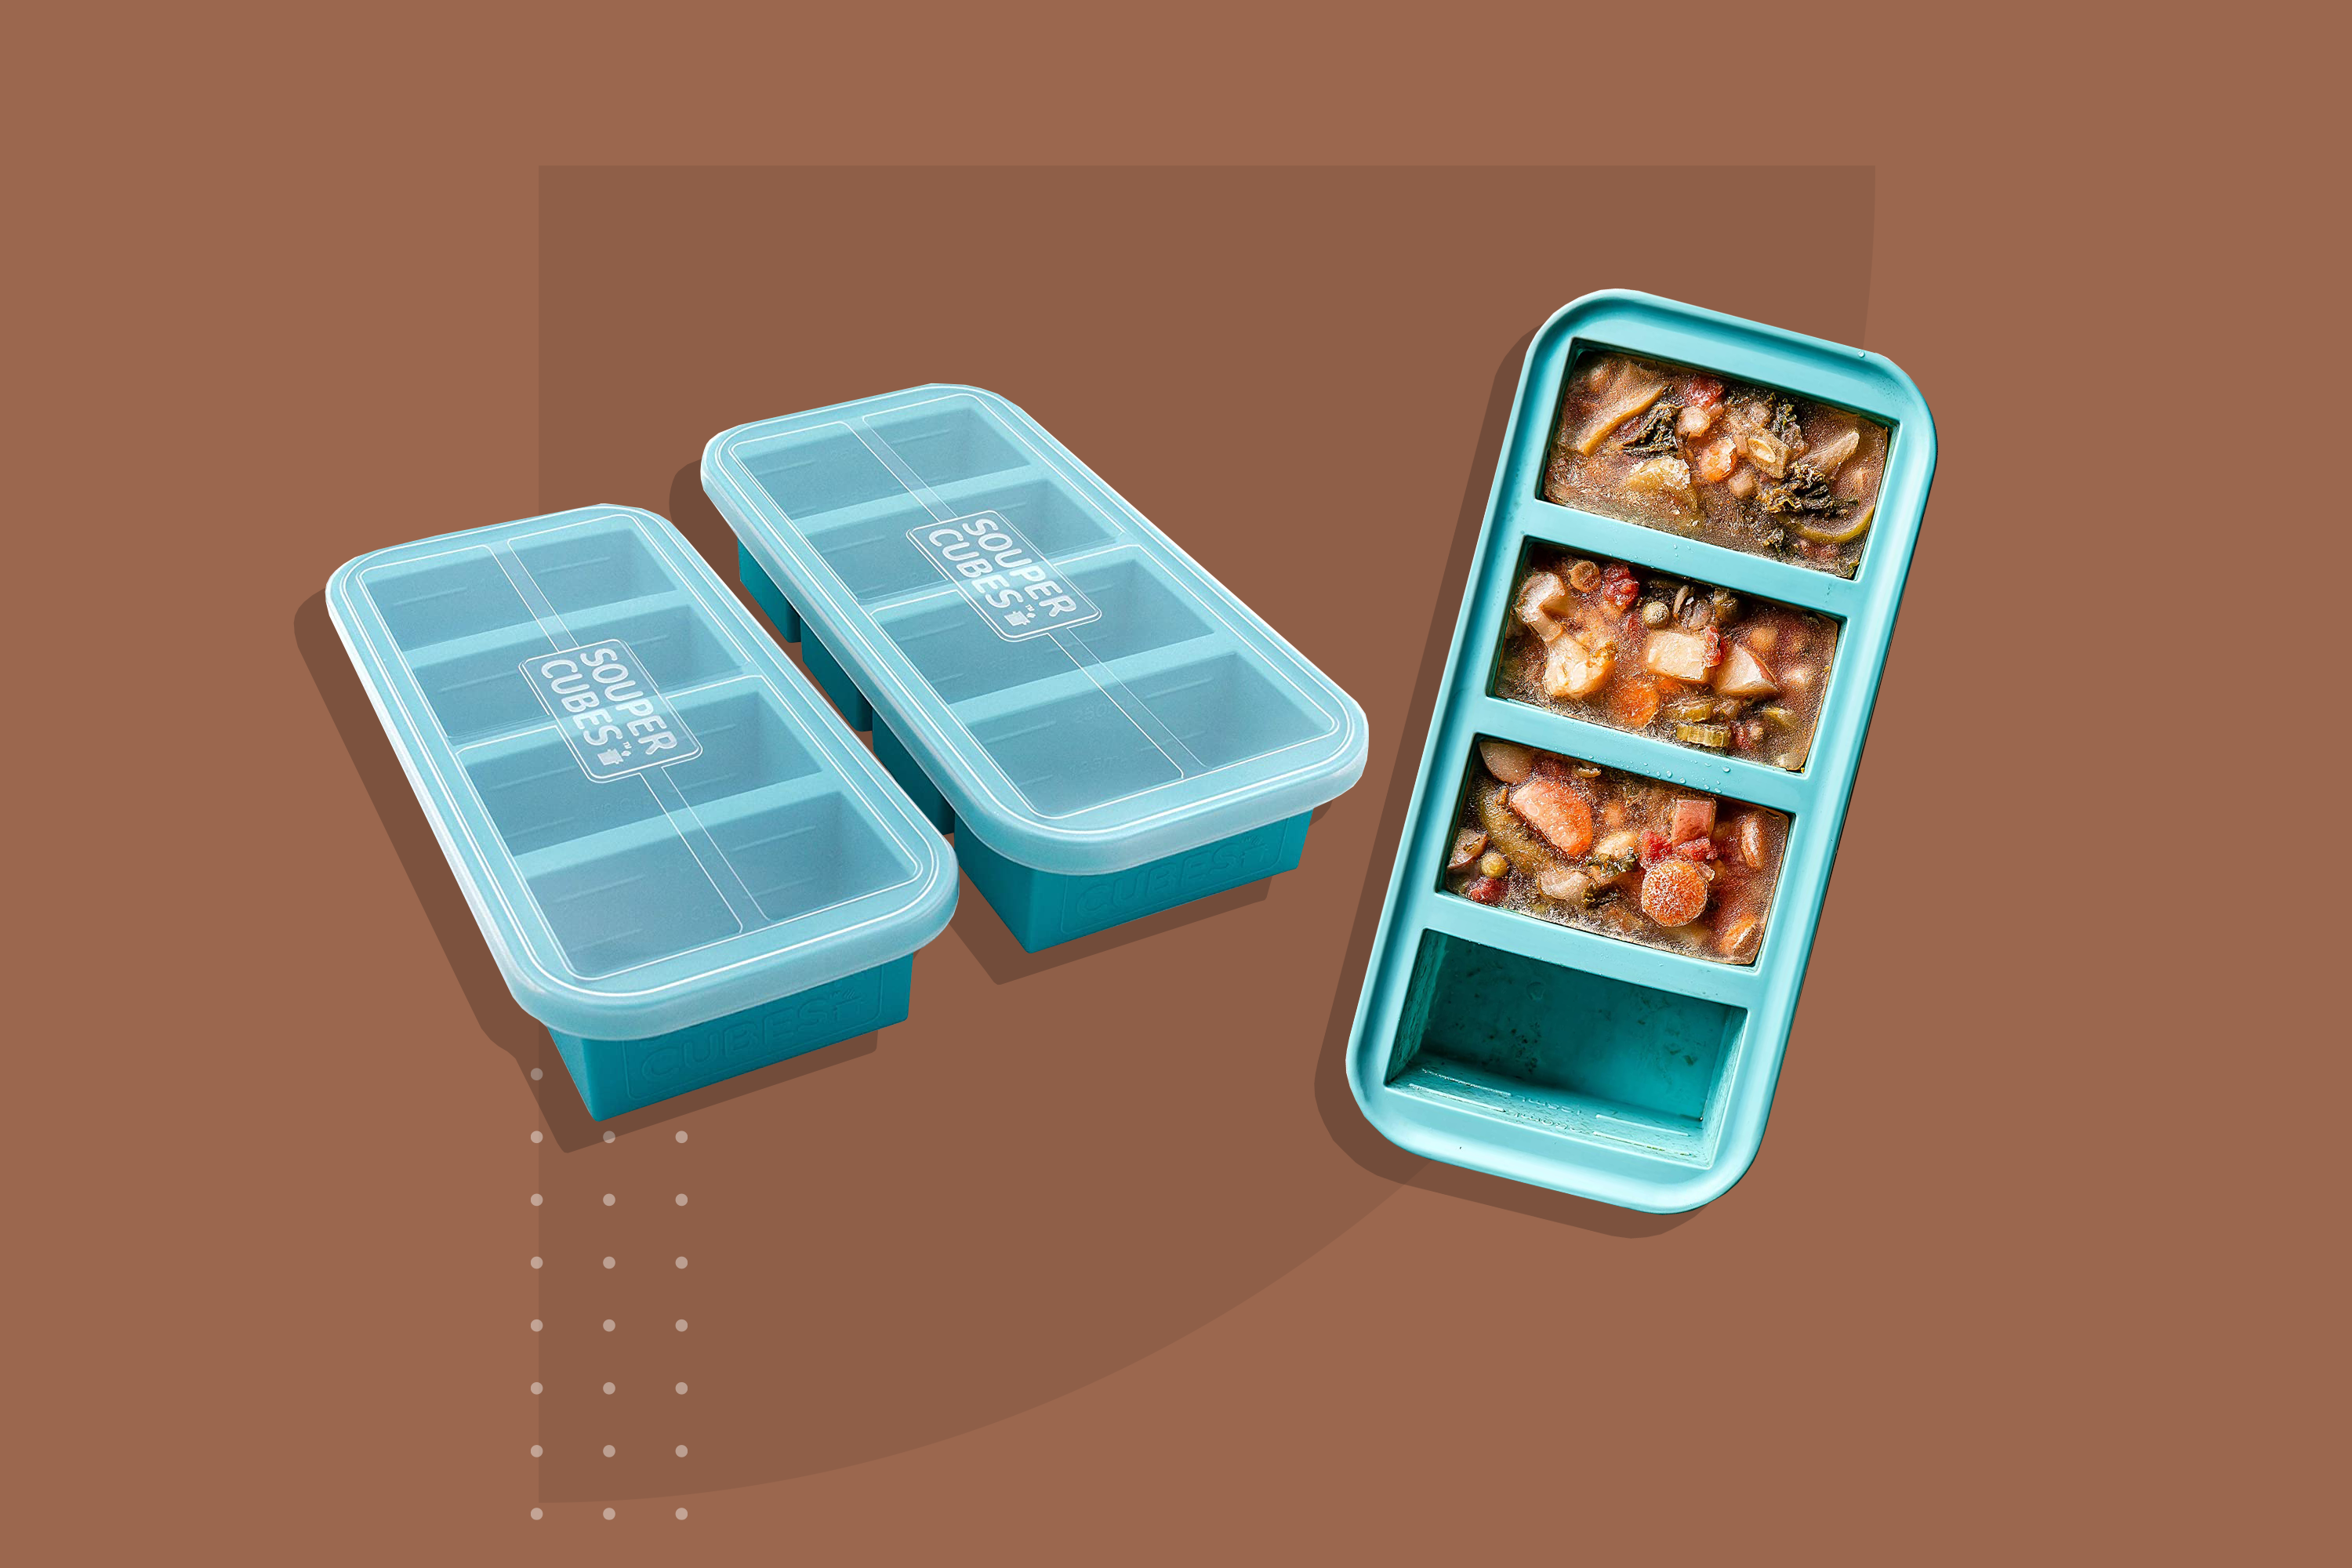 The Best Freezer Containers